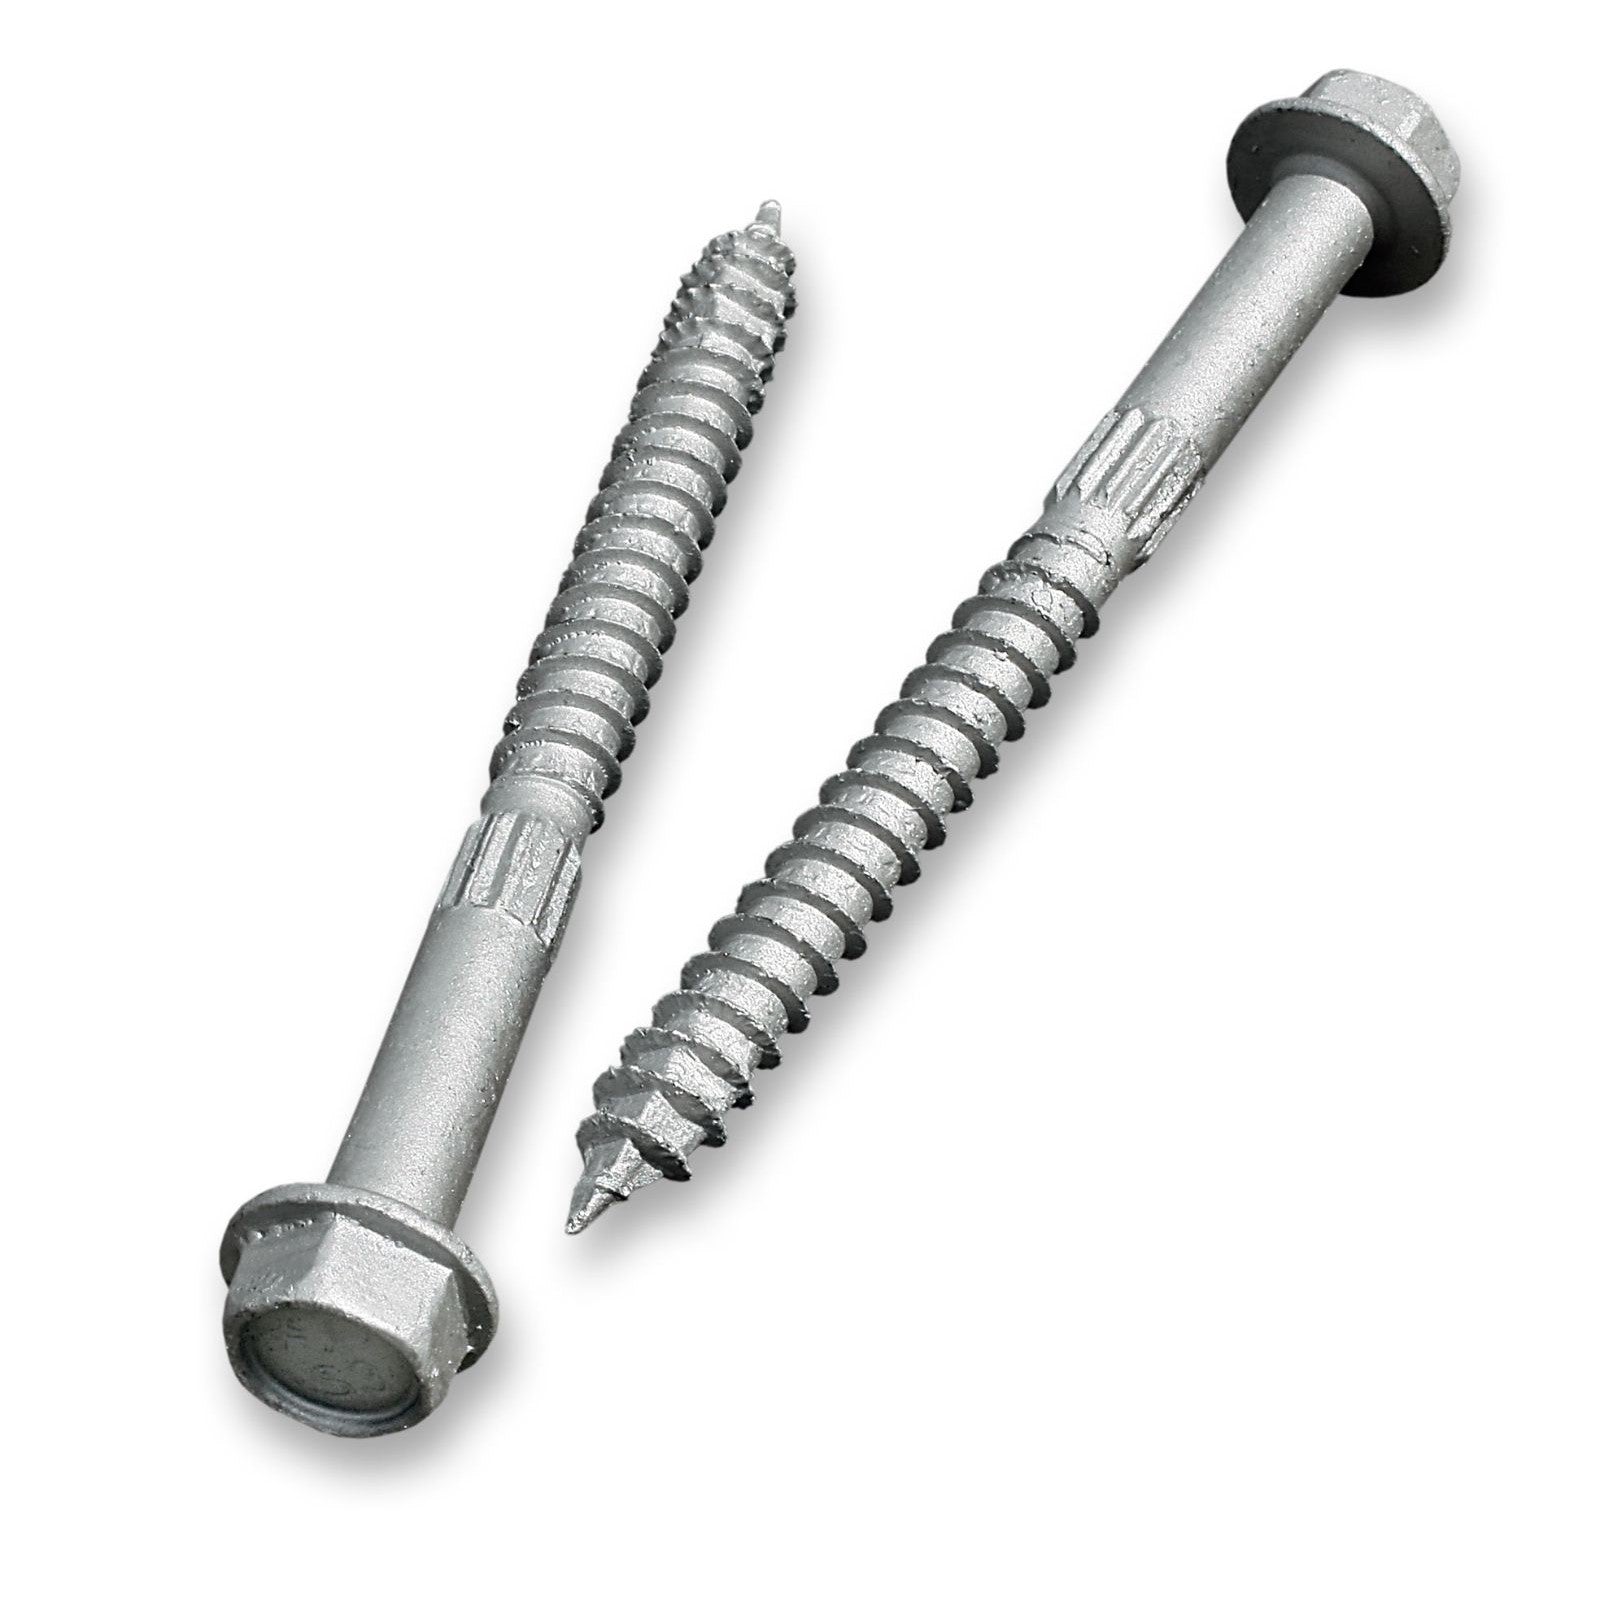 Simpson Structural Screws SDS25112-R25 1/4-Inch by 1-1/2-Inch with 1-Inch  threaded Structural Wood Screw, 25-Pack by Simpson Structural Screws